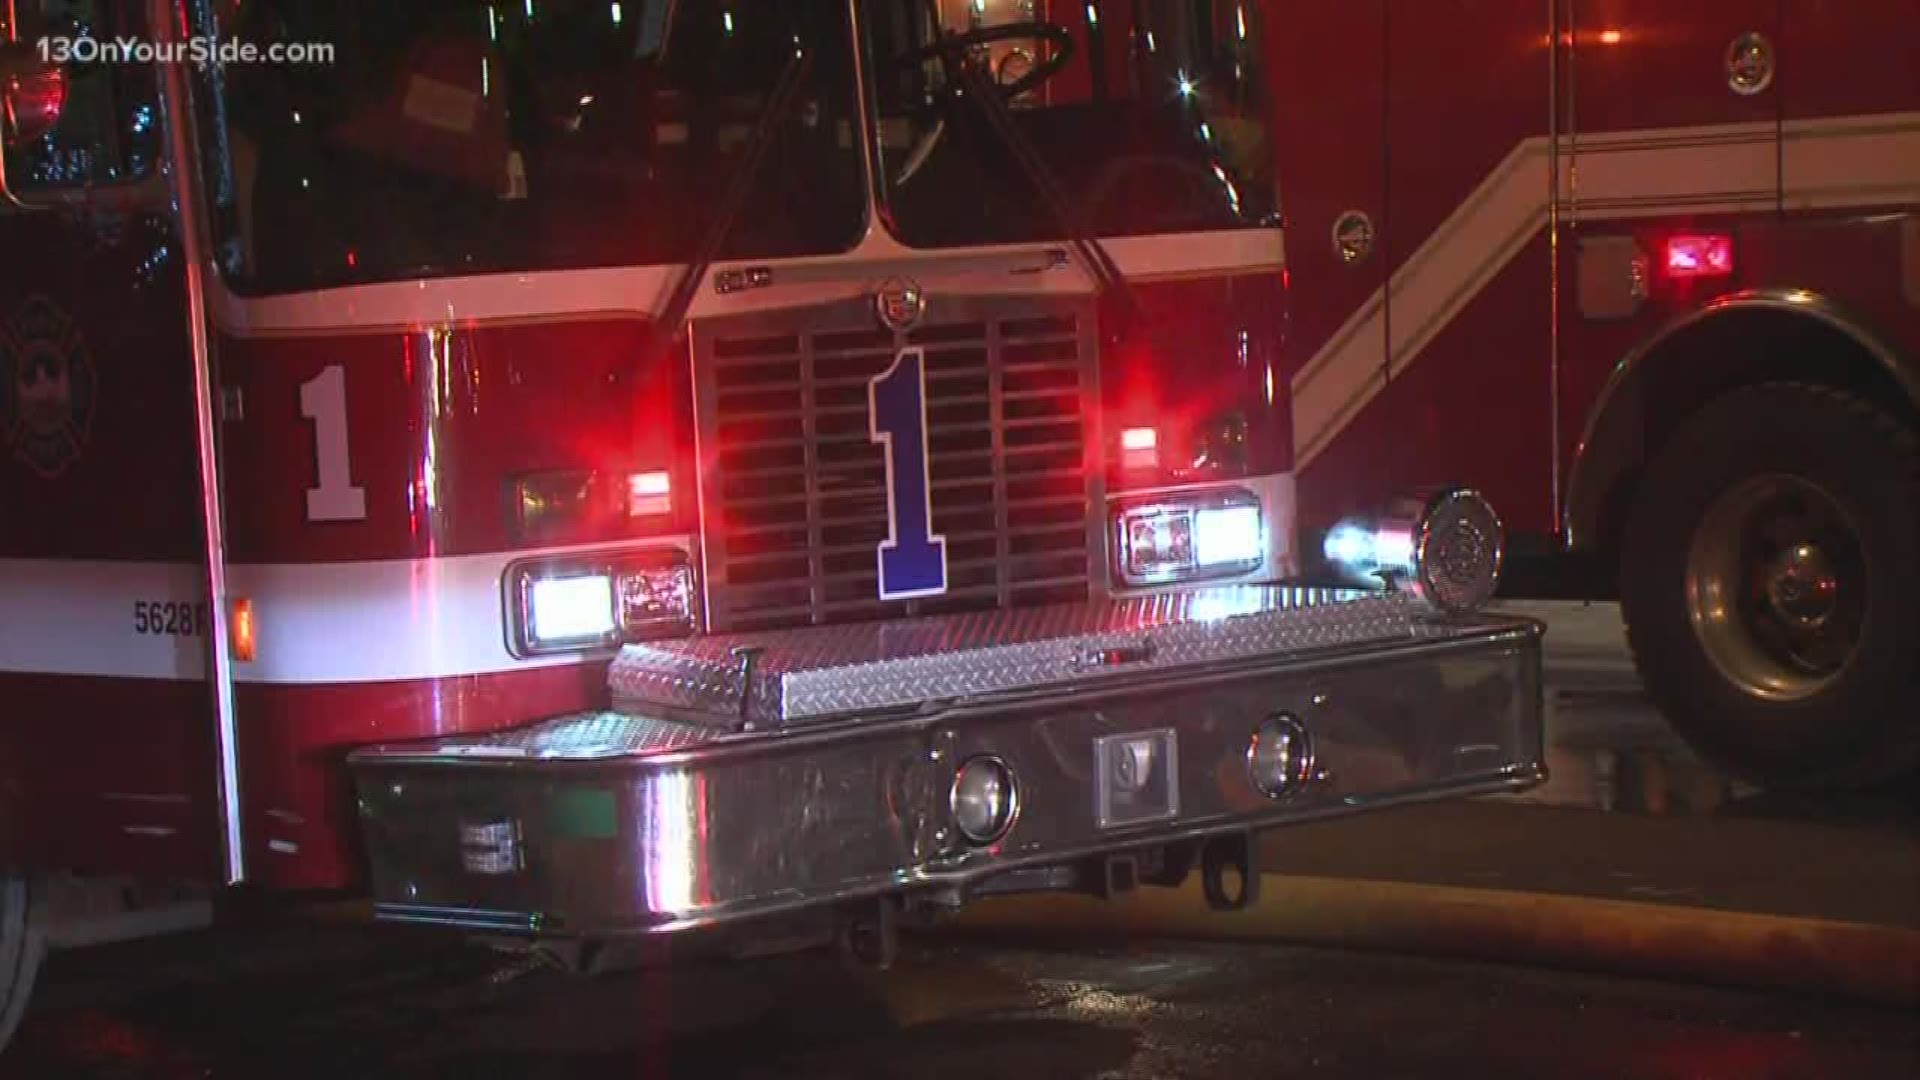 The Grand Rapids Professional Firefighters answered 24,156 alarms in 2019, which is 66 alarms a day. This number was 1,751 more than in 2018.